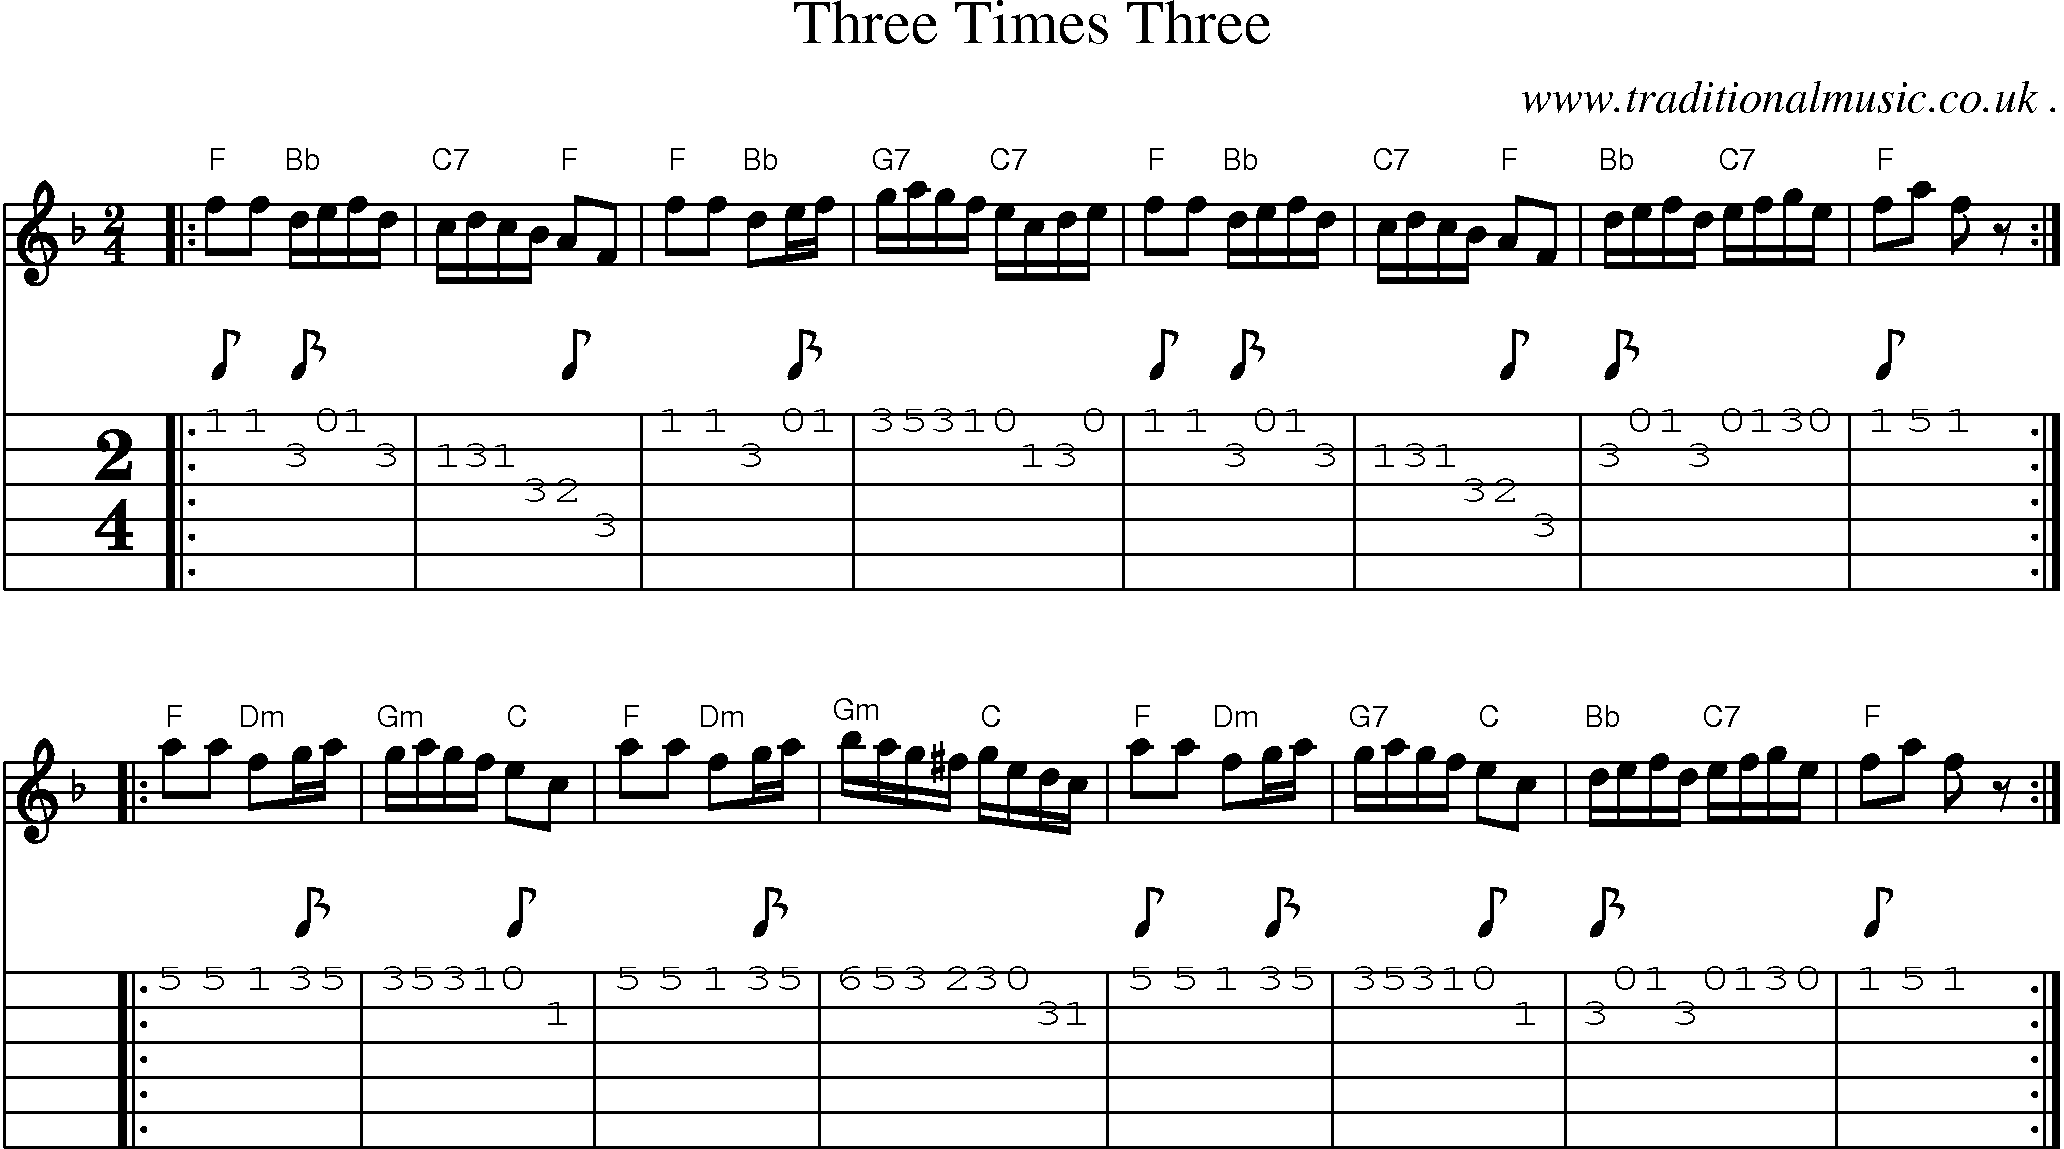 Sheet-music  score, Chords and Guitar Tabs for Three Times Three